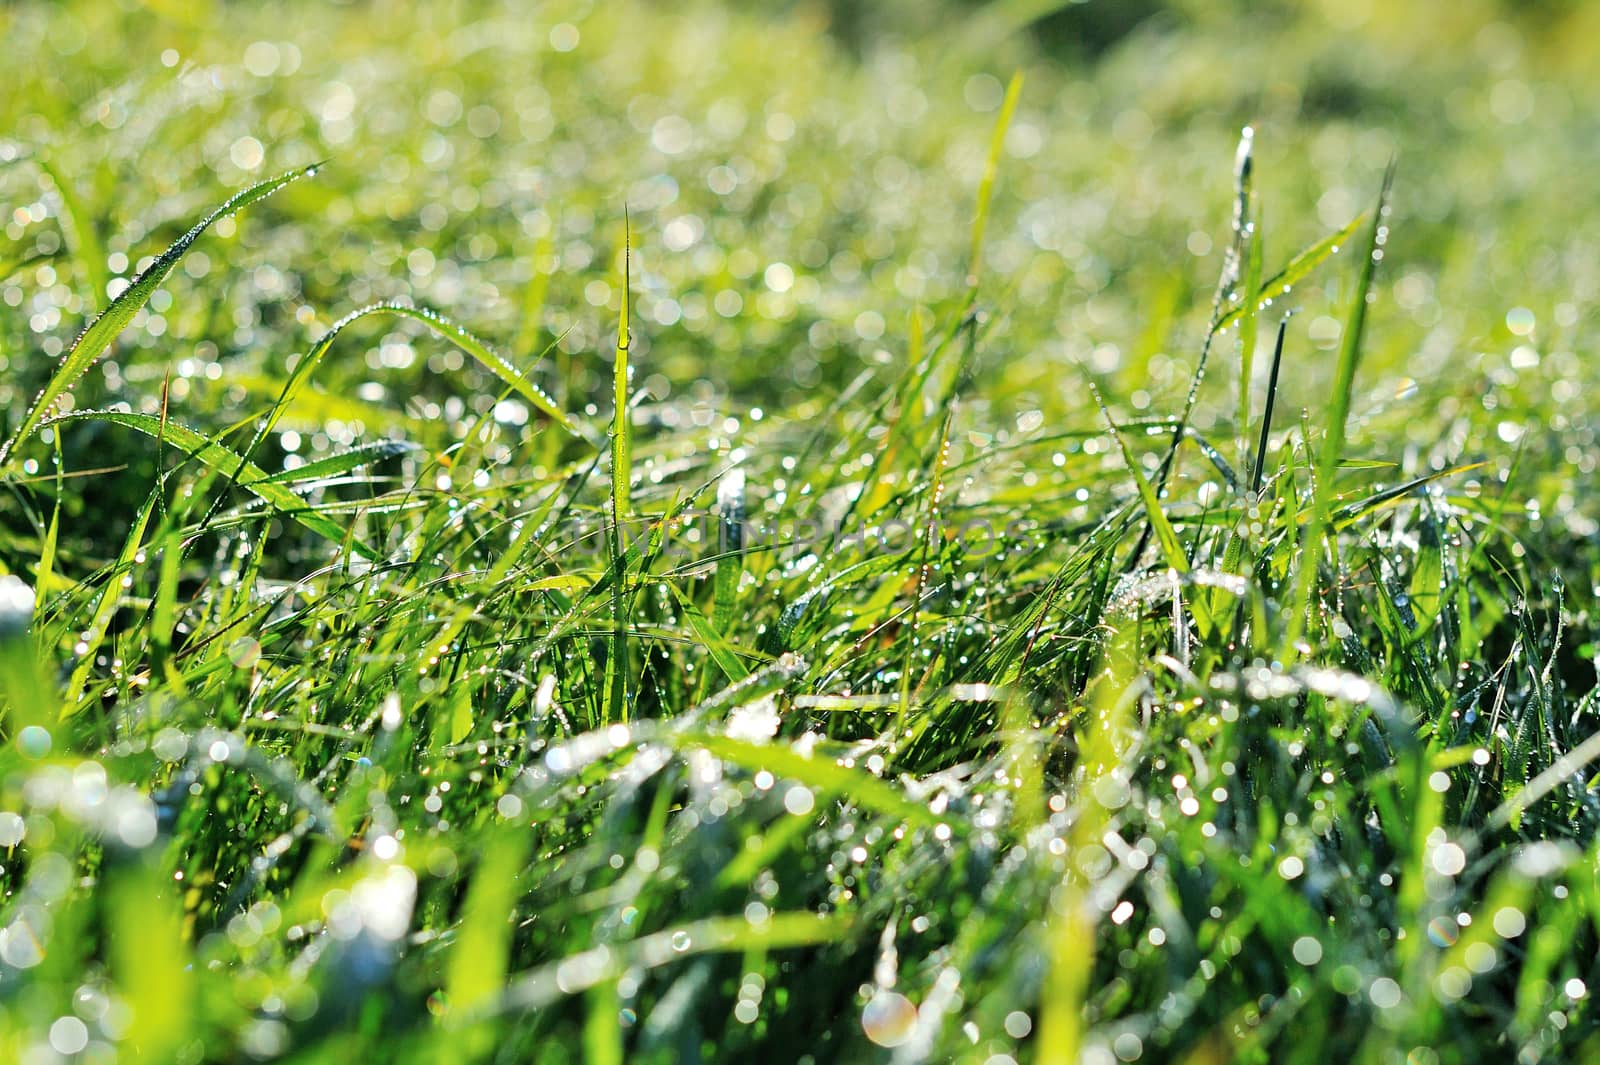 drops of dew on a green grass.